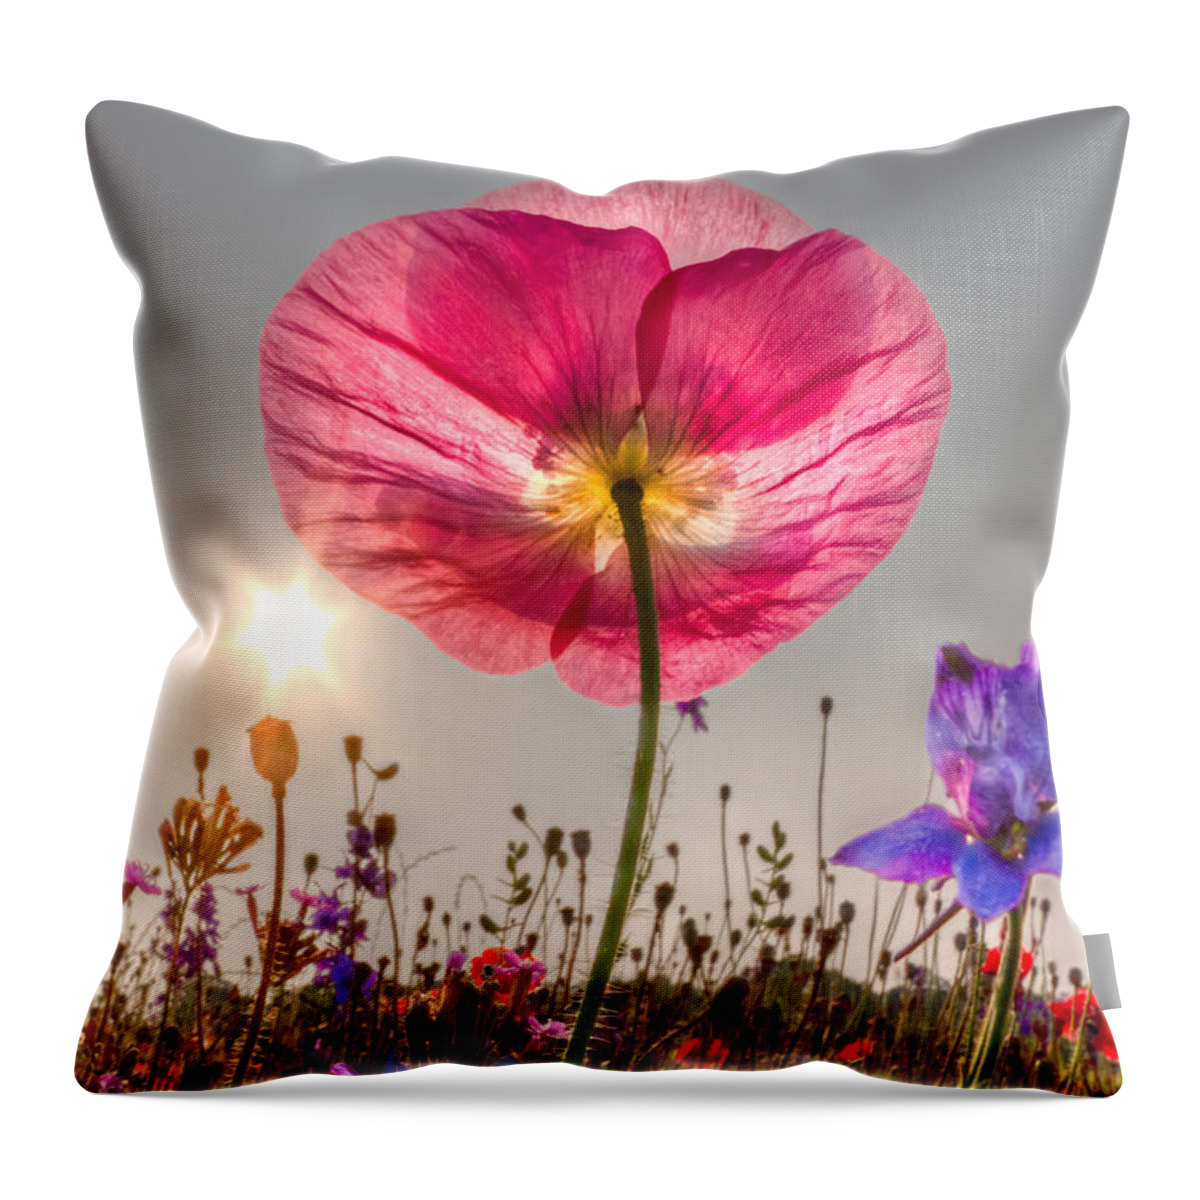 Fog Throw Pillow featuring the photograph Morning Pink by Debra and Dave Vanderlaan